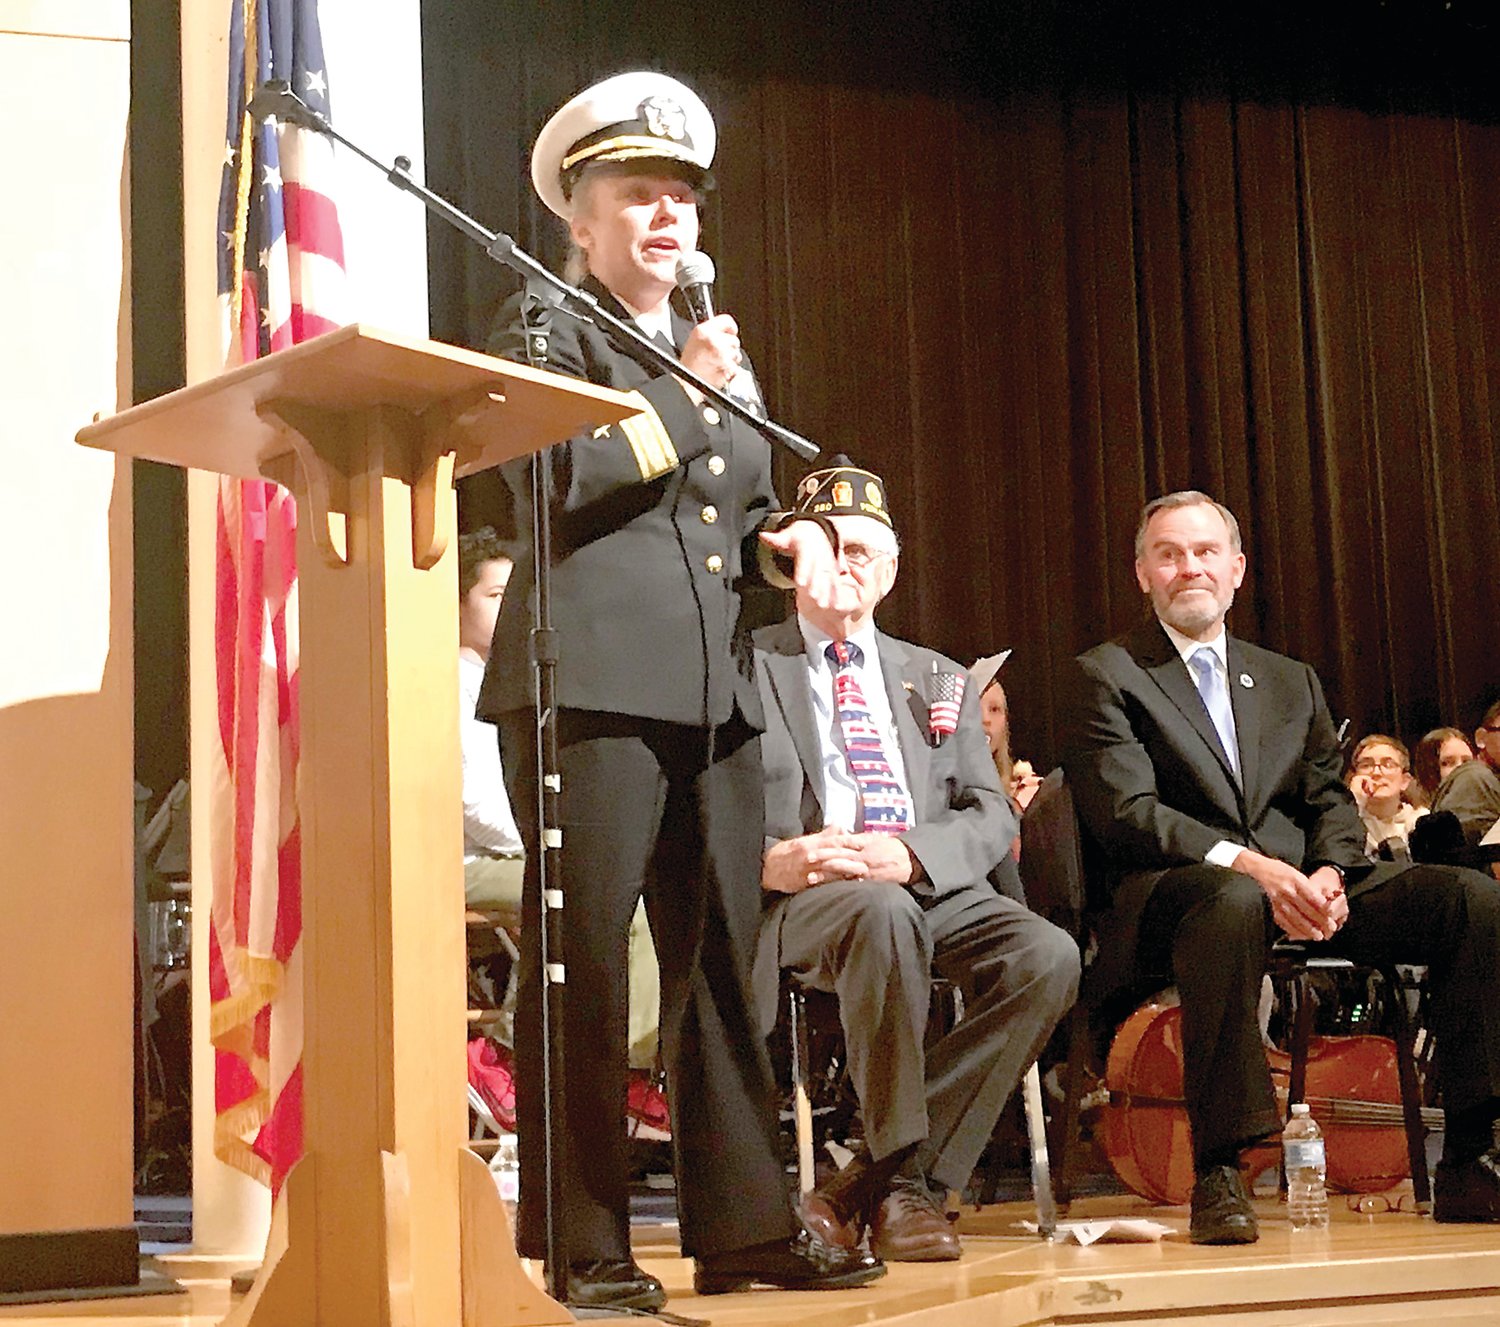 Navy Rear Adm. Linda Wackerman speaks to the crowd in the Strayer Middle School auditorium. Seated are Quakertown Superintendent Dr. Bill Harner, right, and former state Rep. Paul Clymer.